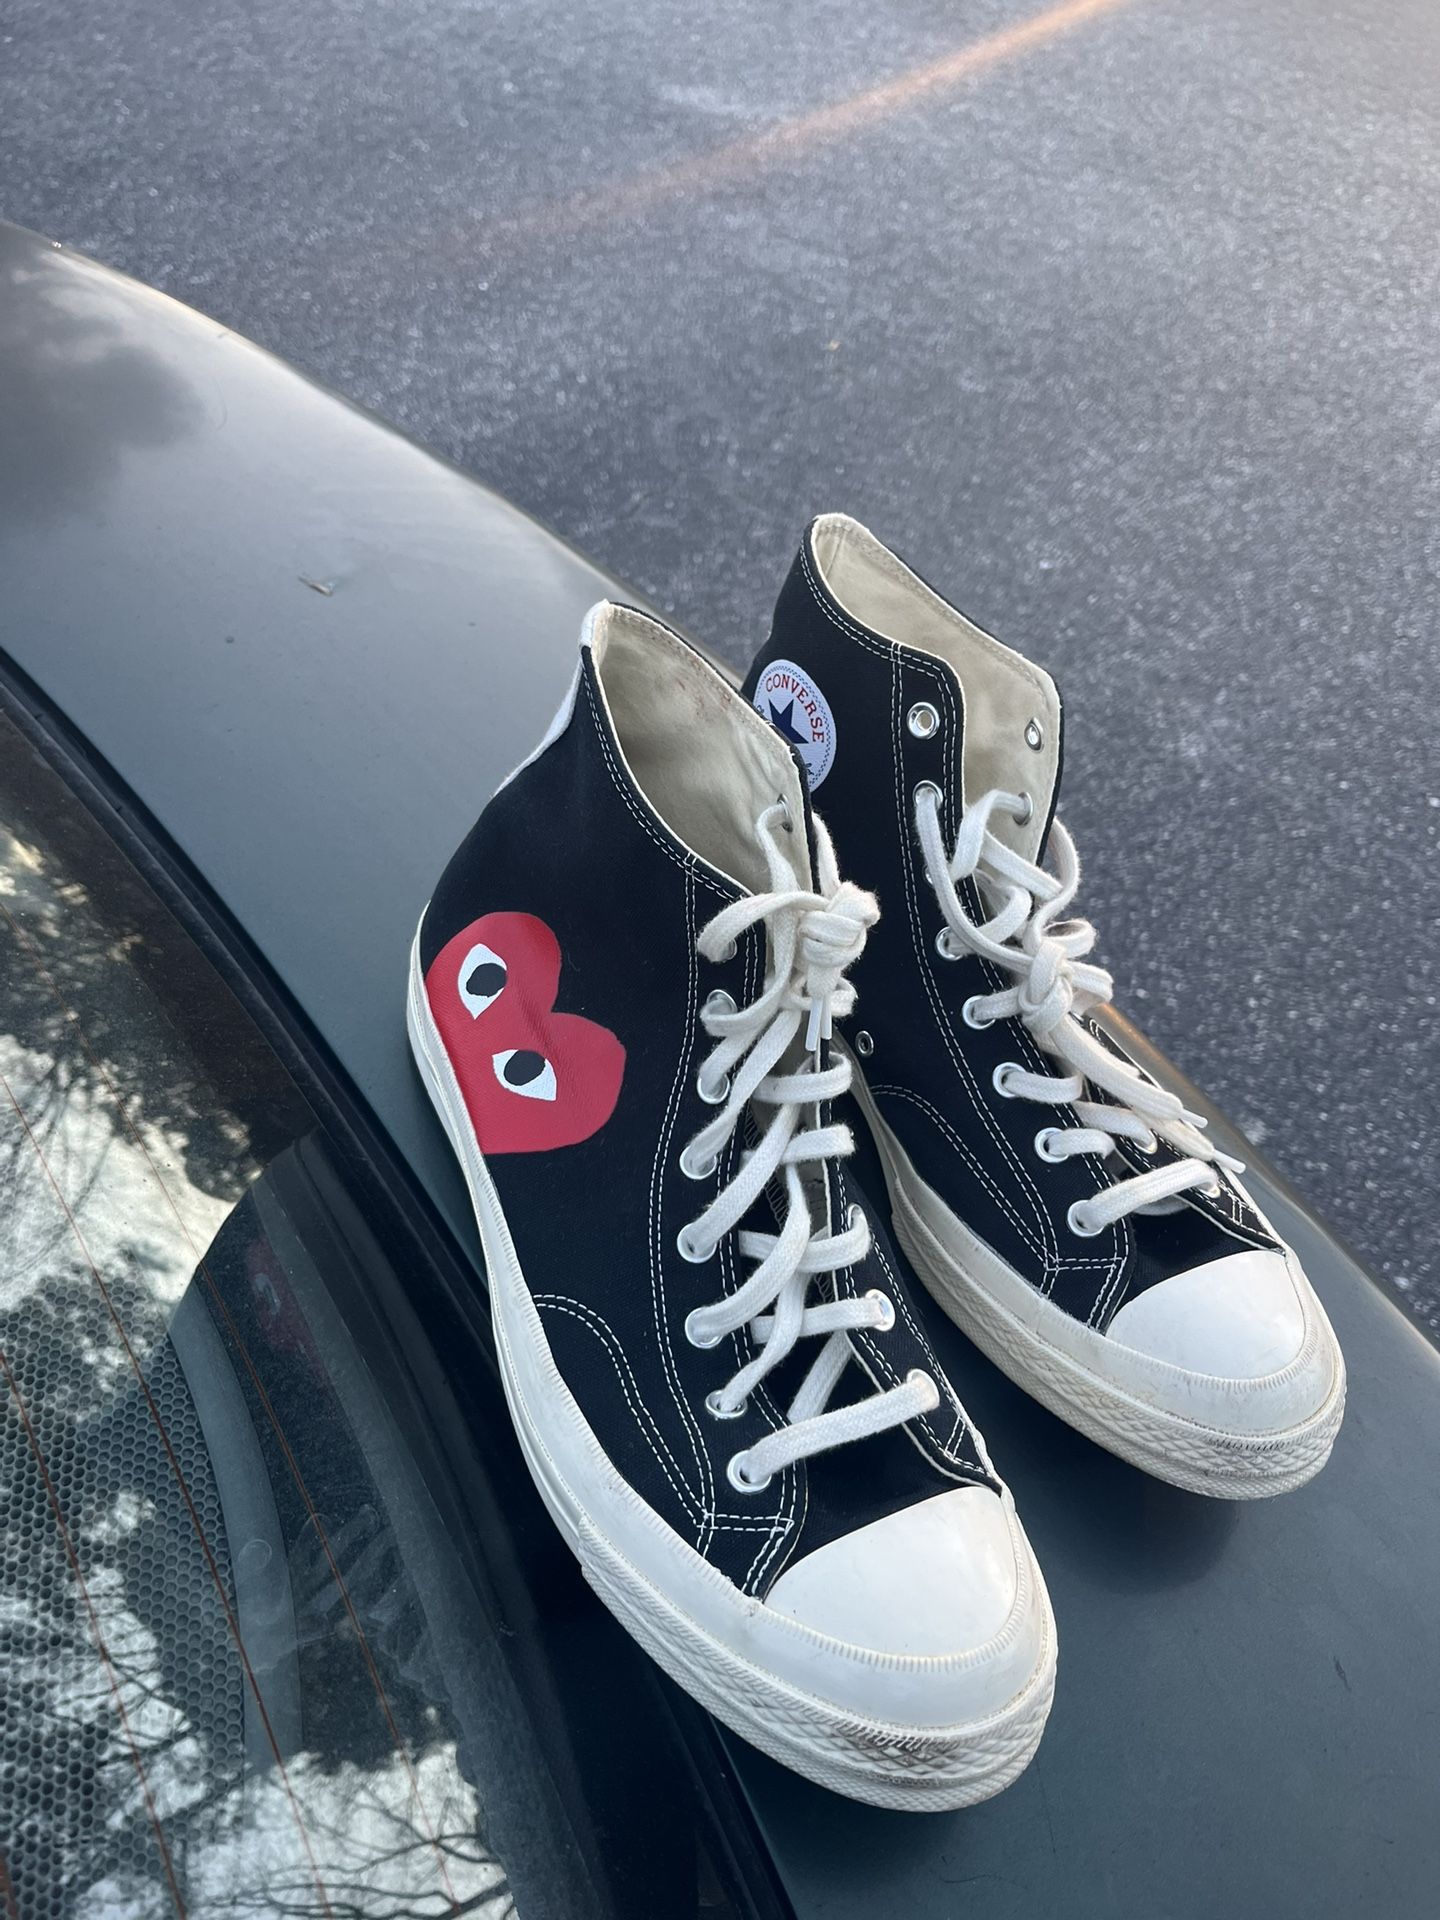 Converse Cdg  Size 12